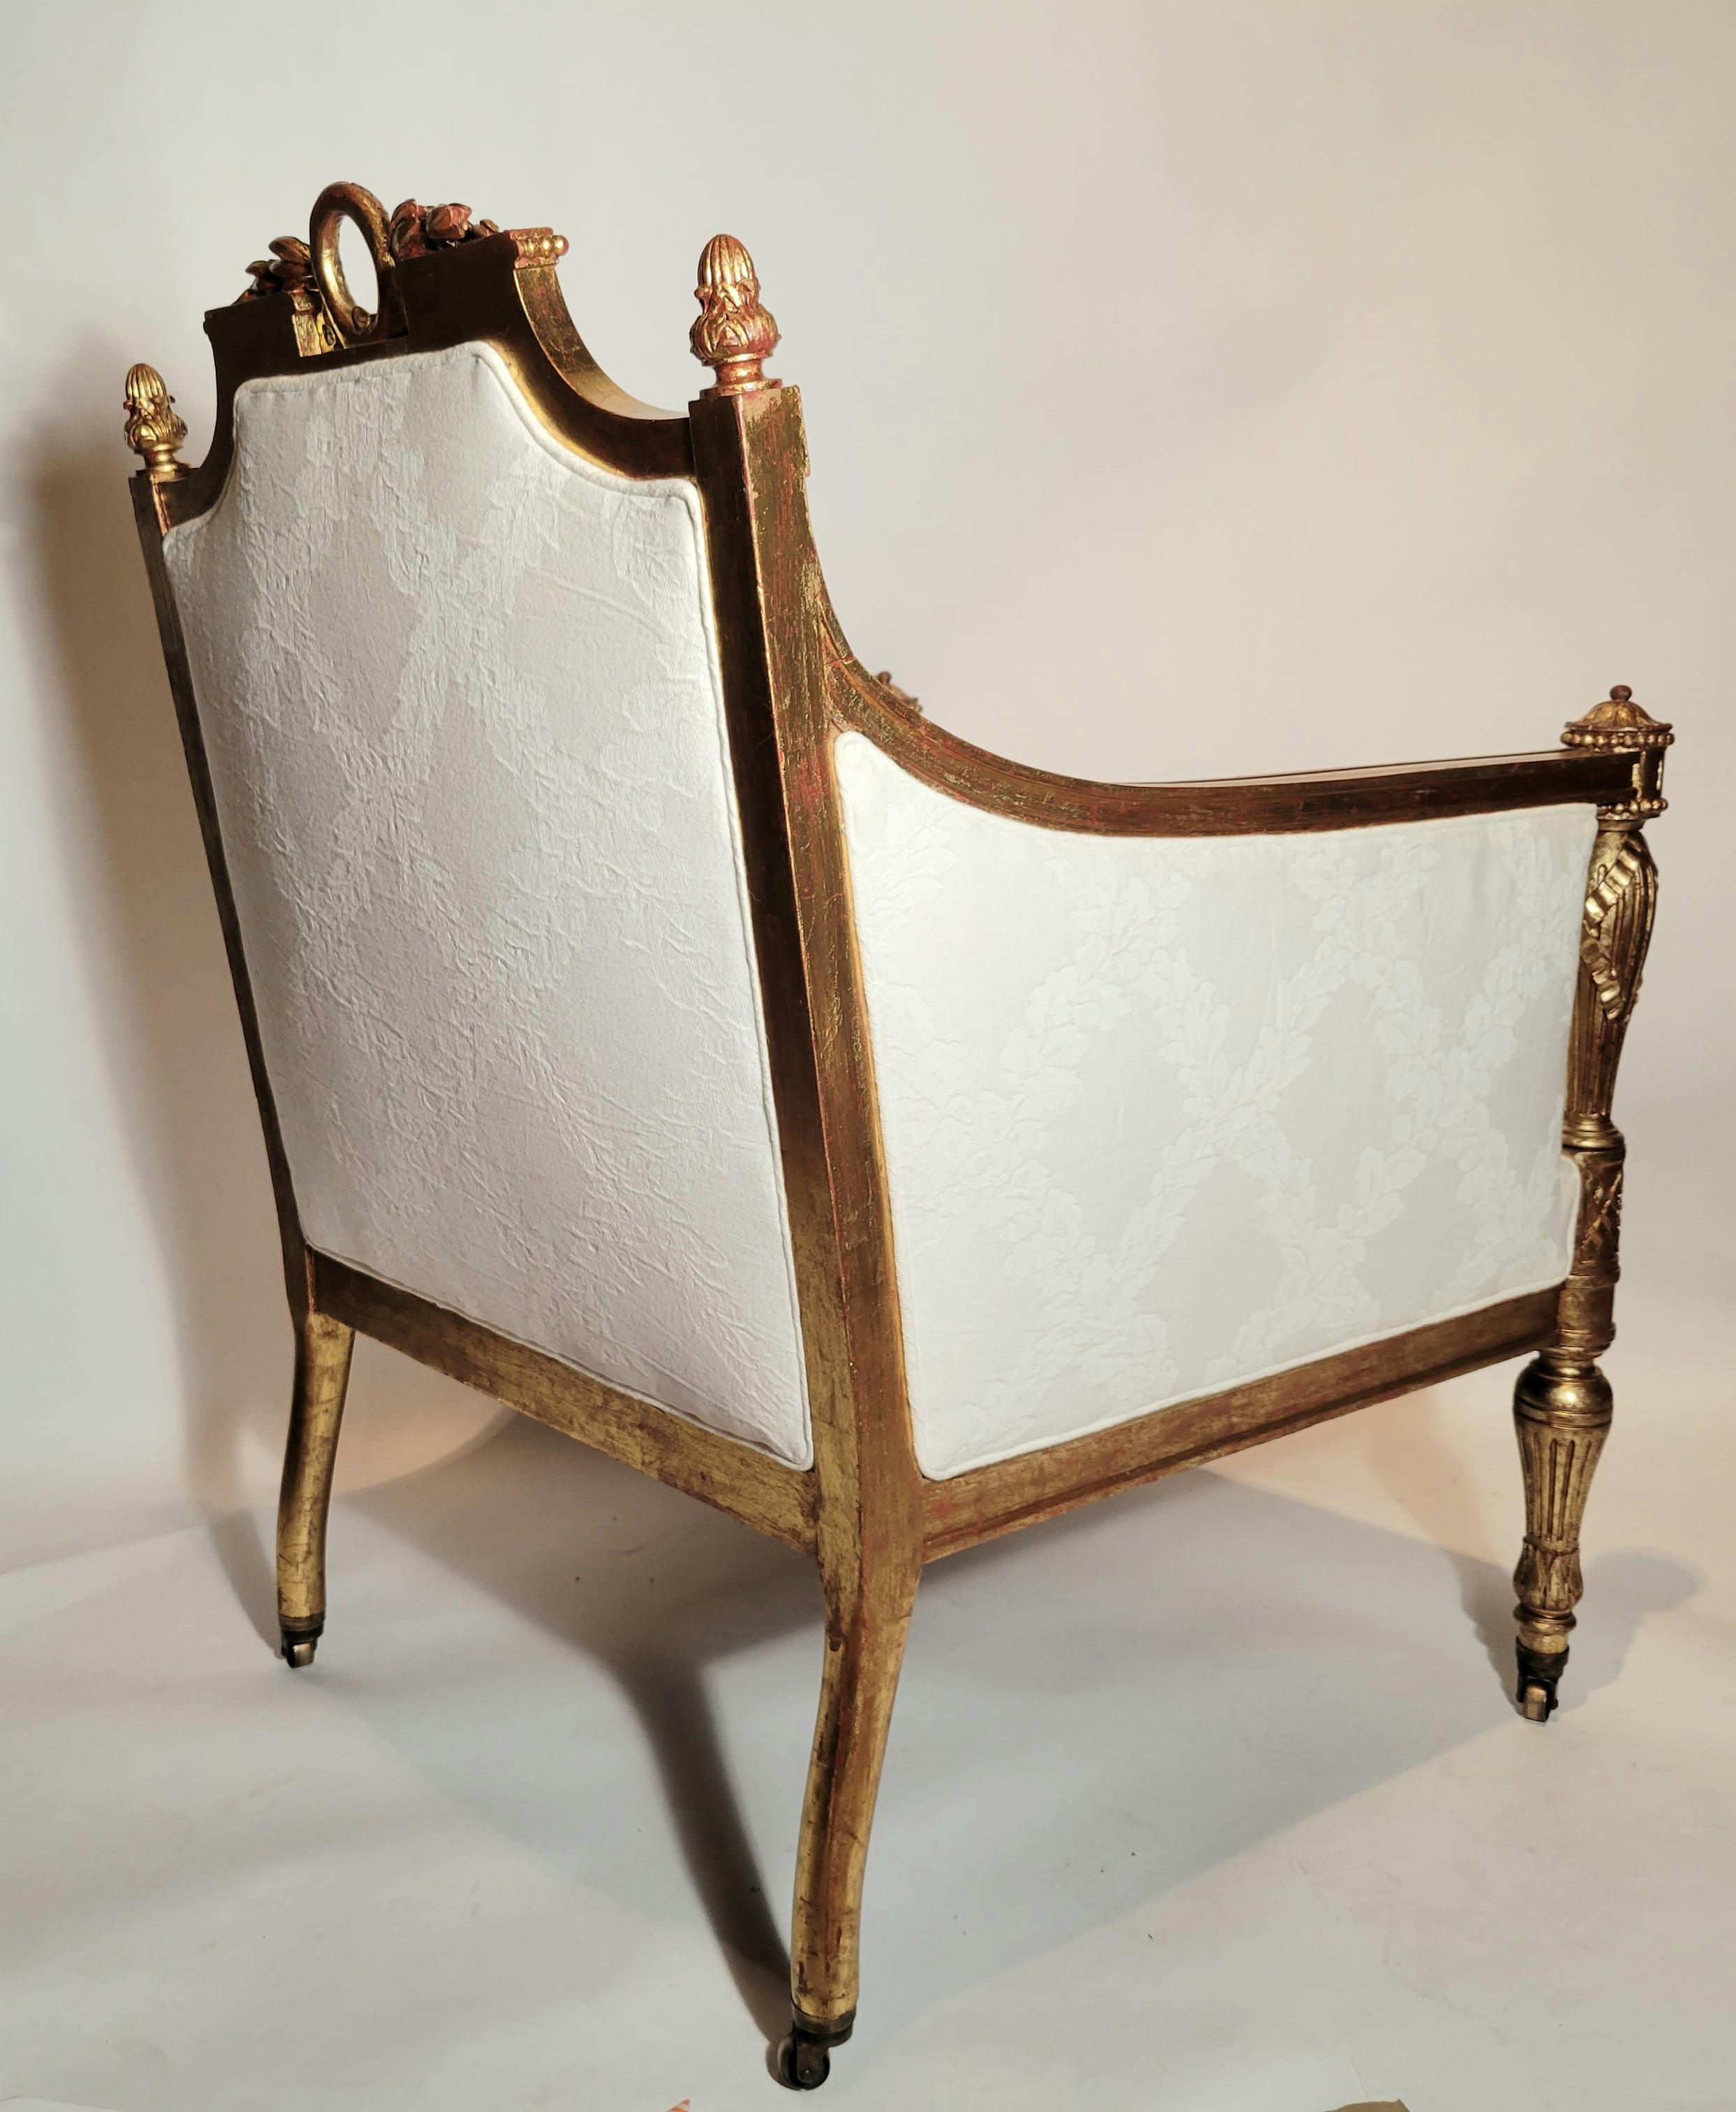 Antique French Louis XVI Finely Carved Gold Leaf Arm Chair circa 1880-1890 In Good Condition For Sale In New Orleans, LA